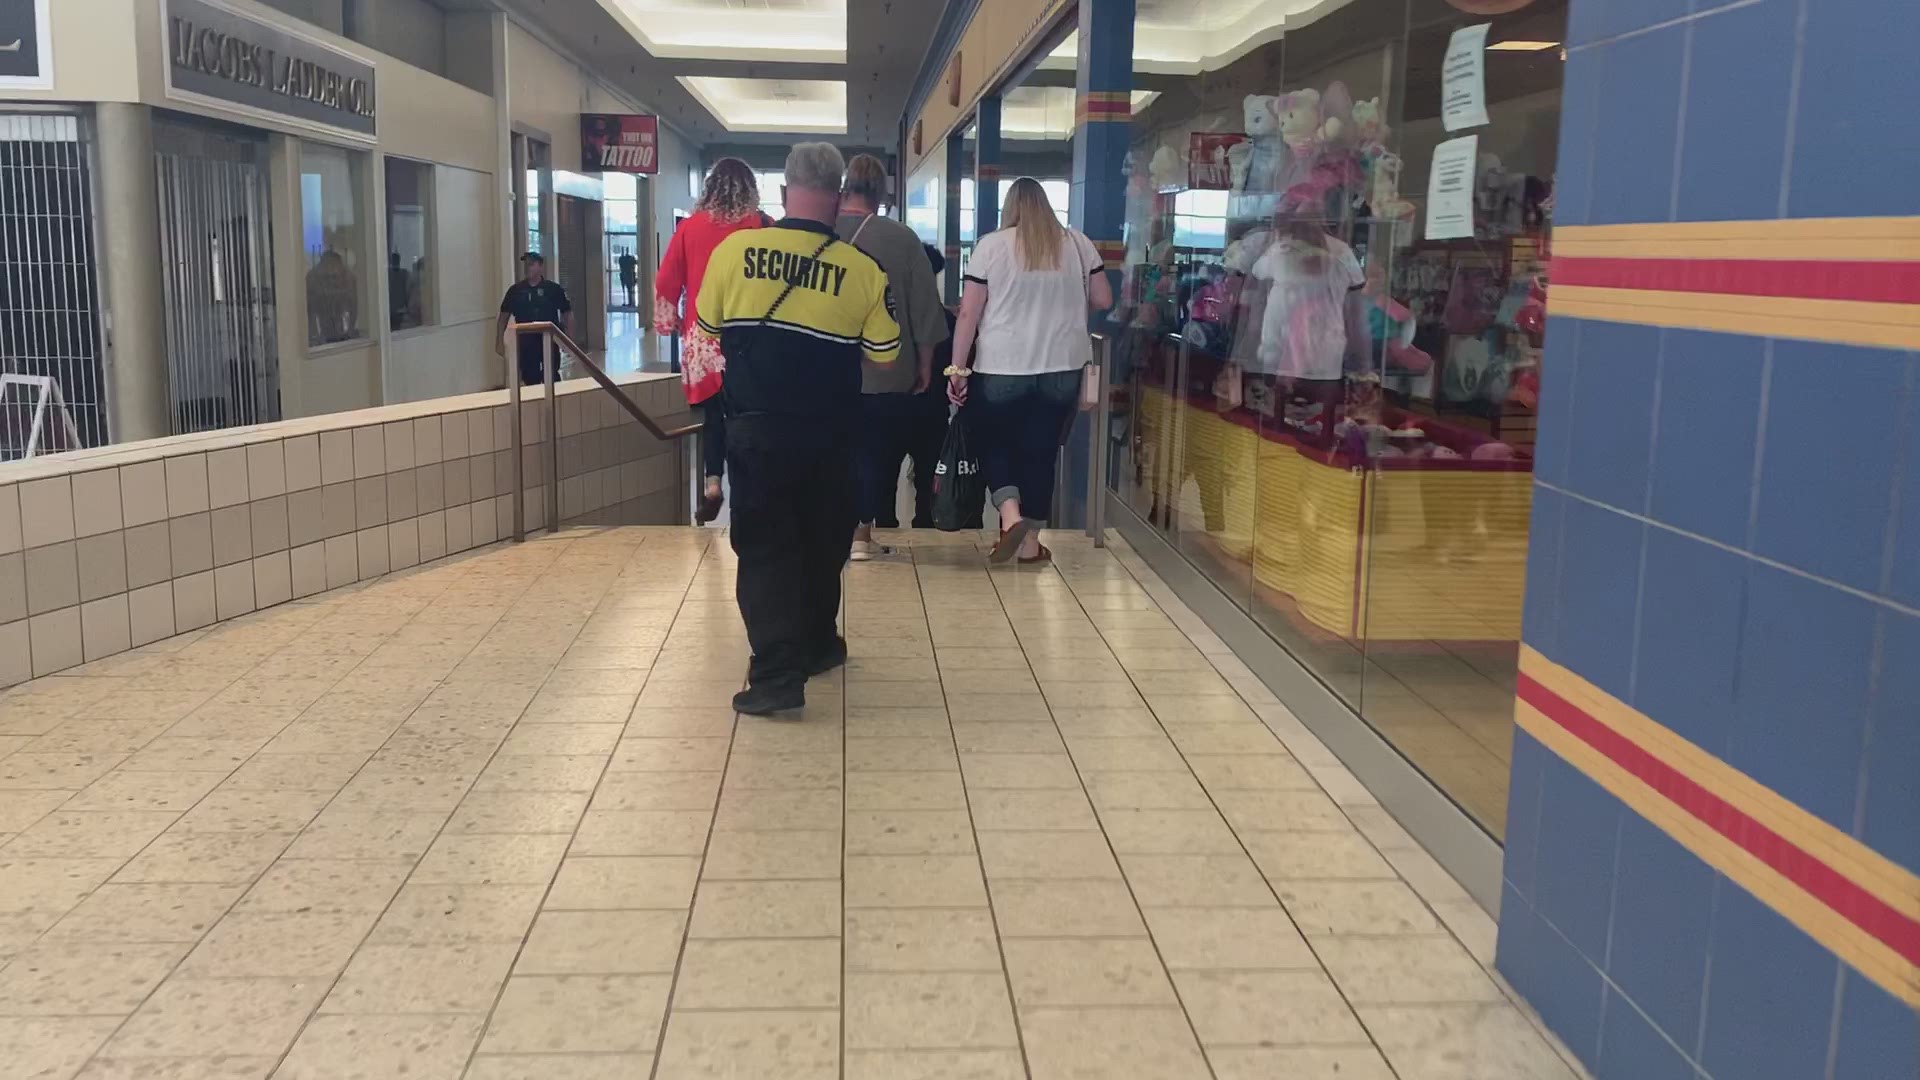 One injured in shooting at Northpark Mall